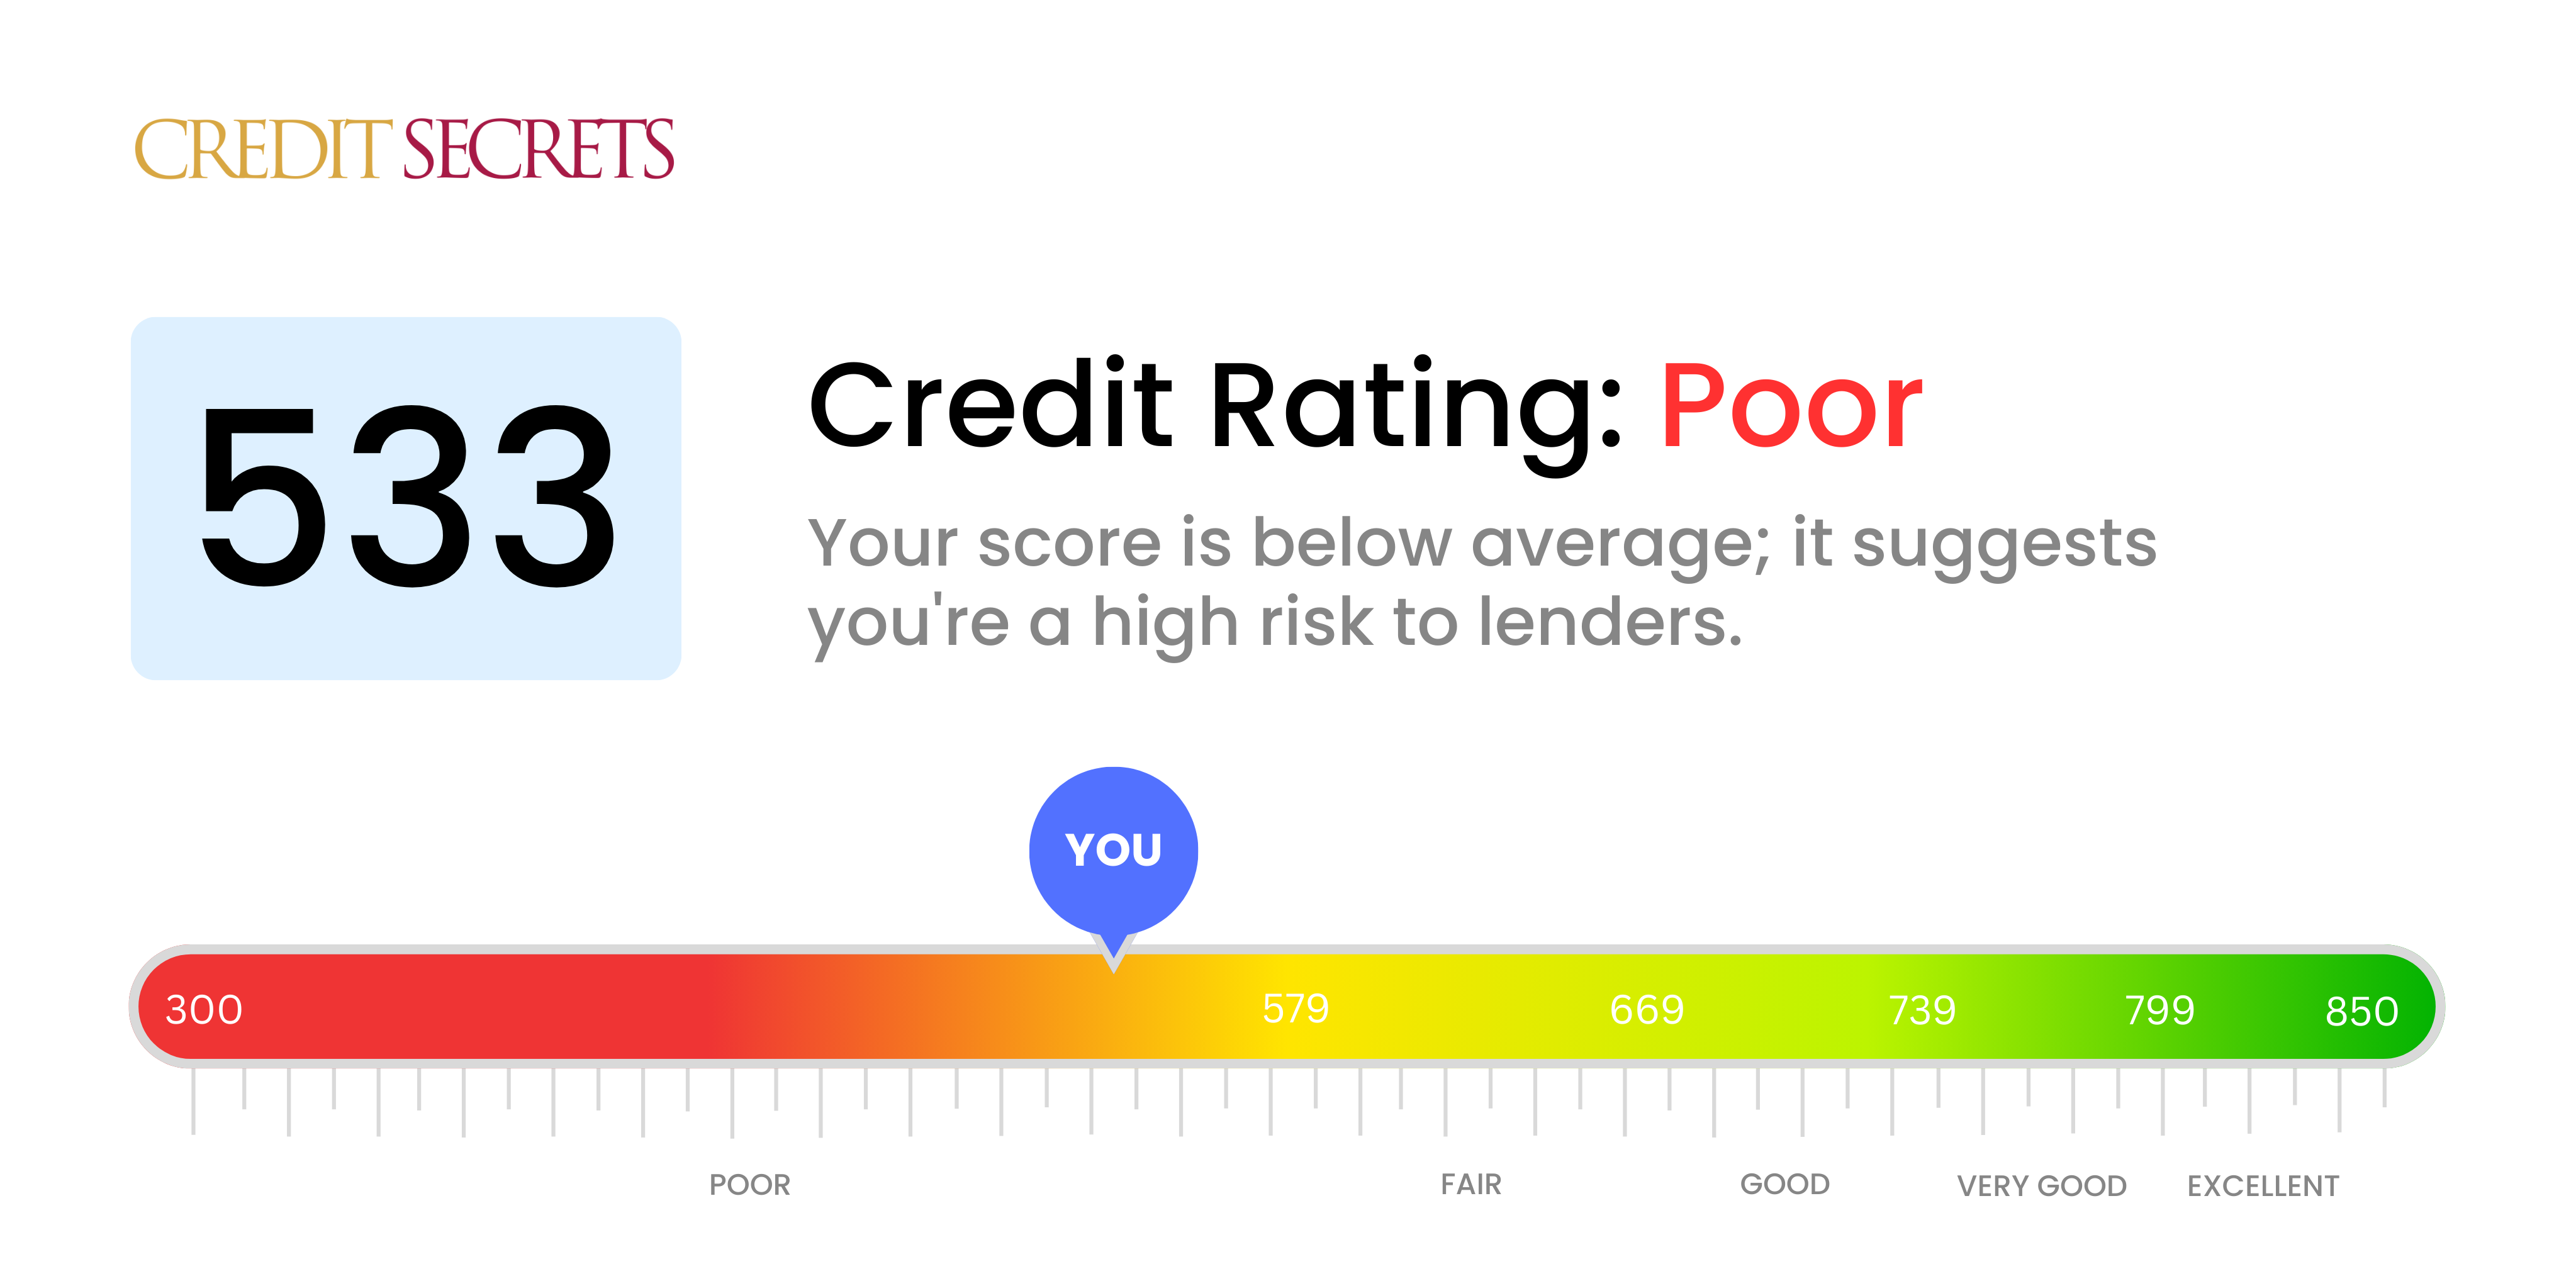 Is 533 a good credit score?